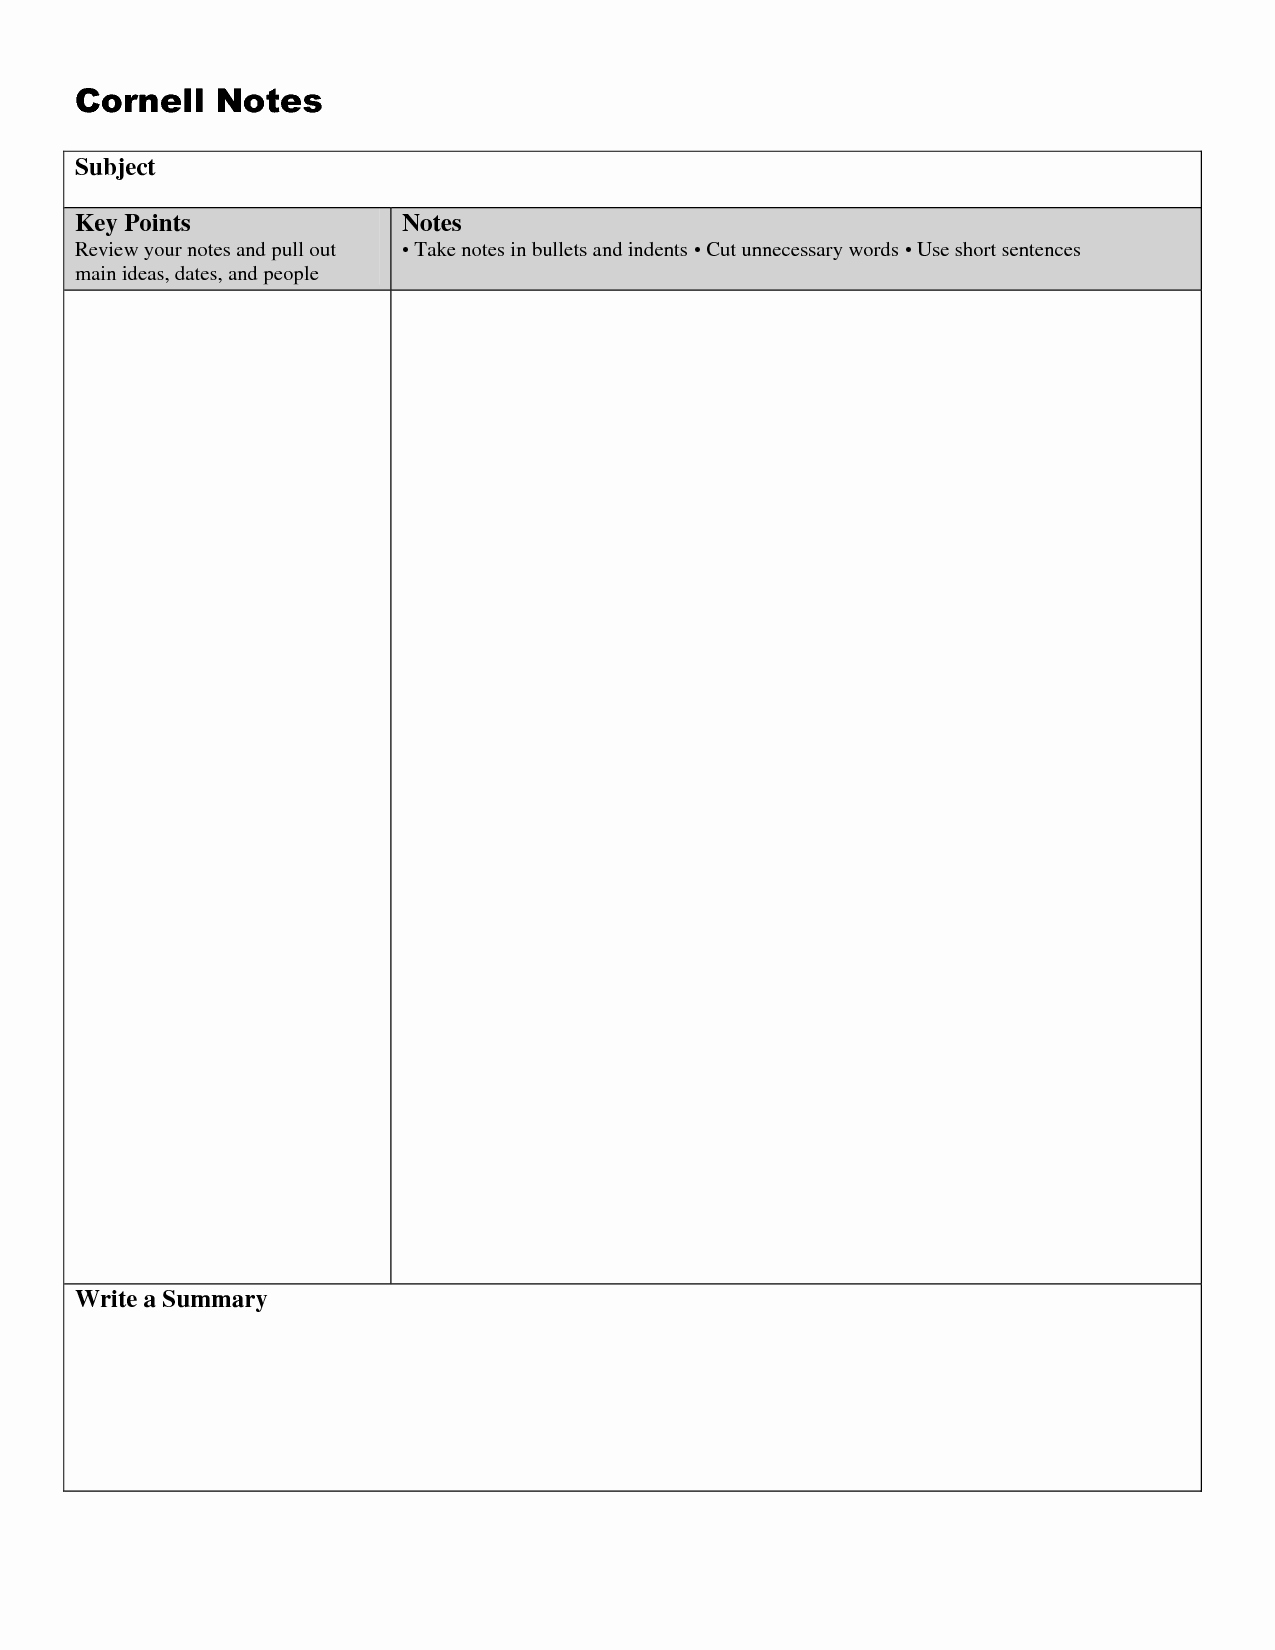 Note Taking Template Word New Cornell Notes Template Doc Cornell Notes Template Doc